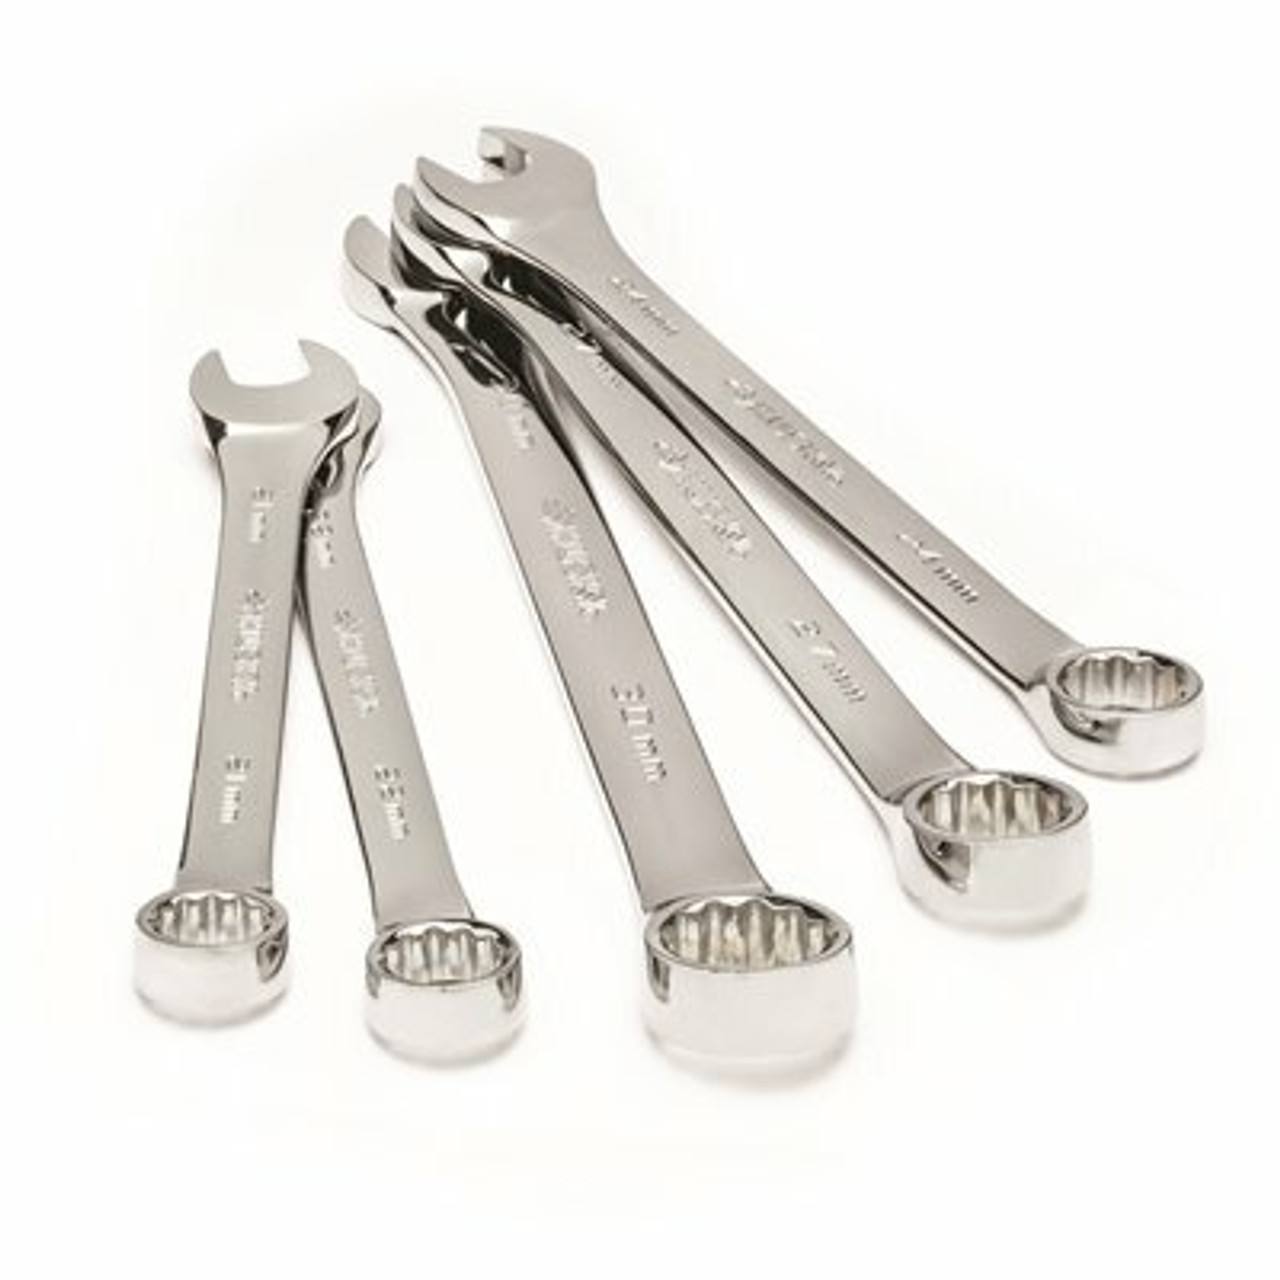 Husky Xl Mm Combination Wrench Set (5-Piece)